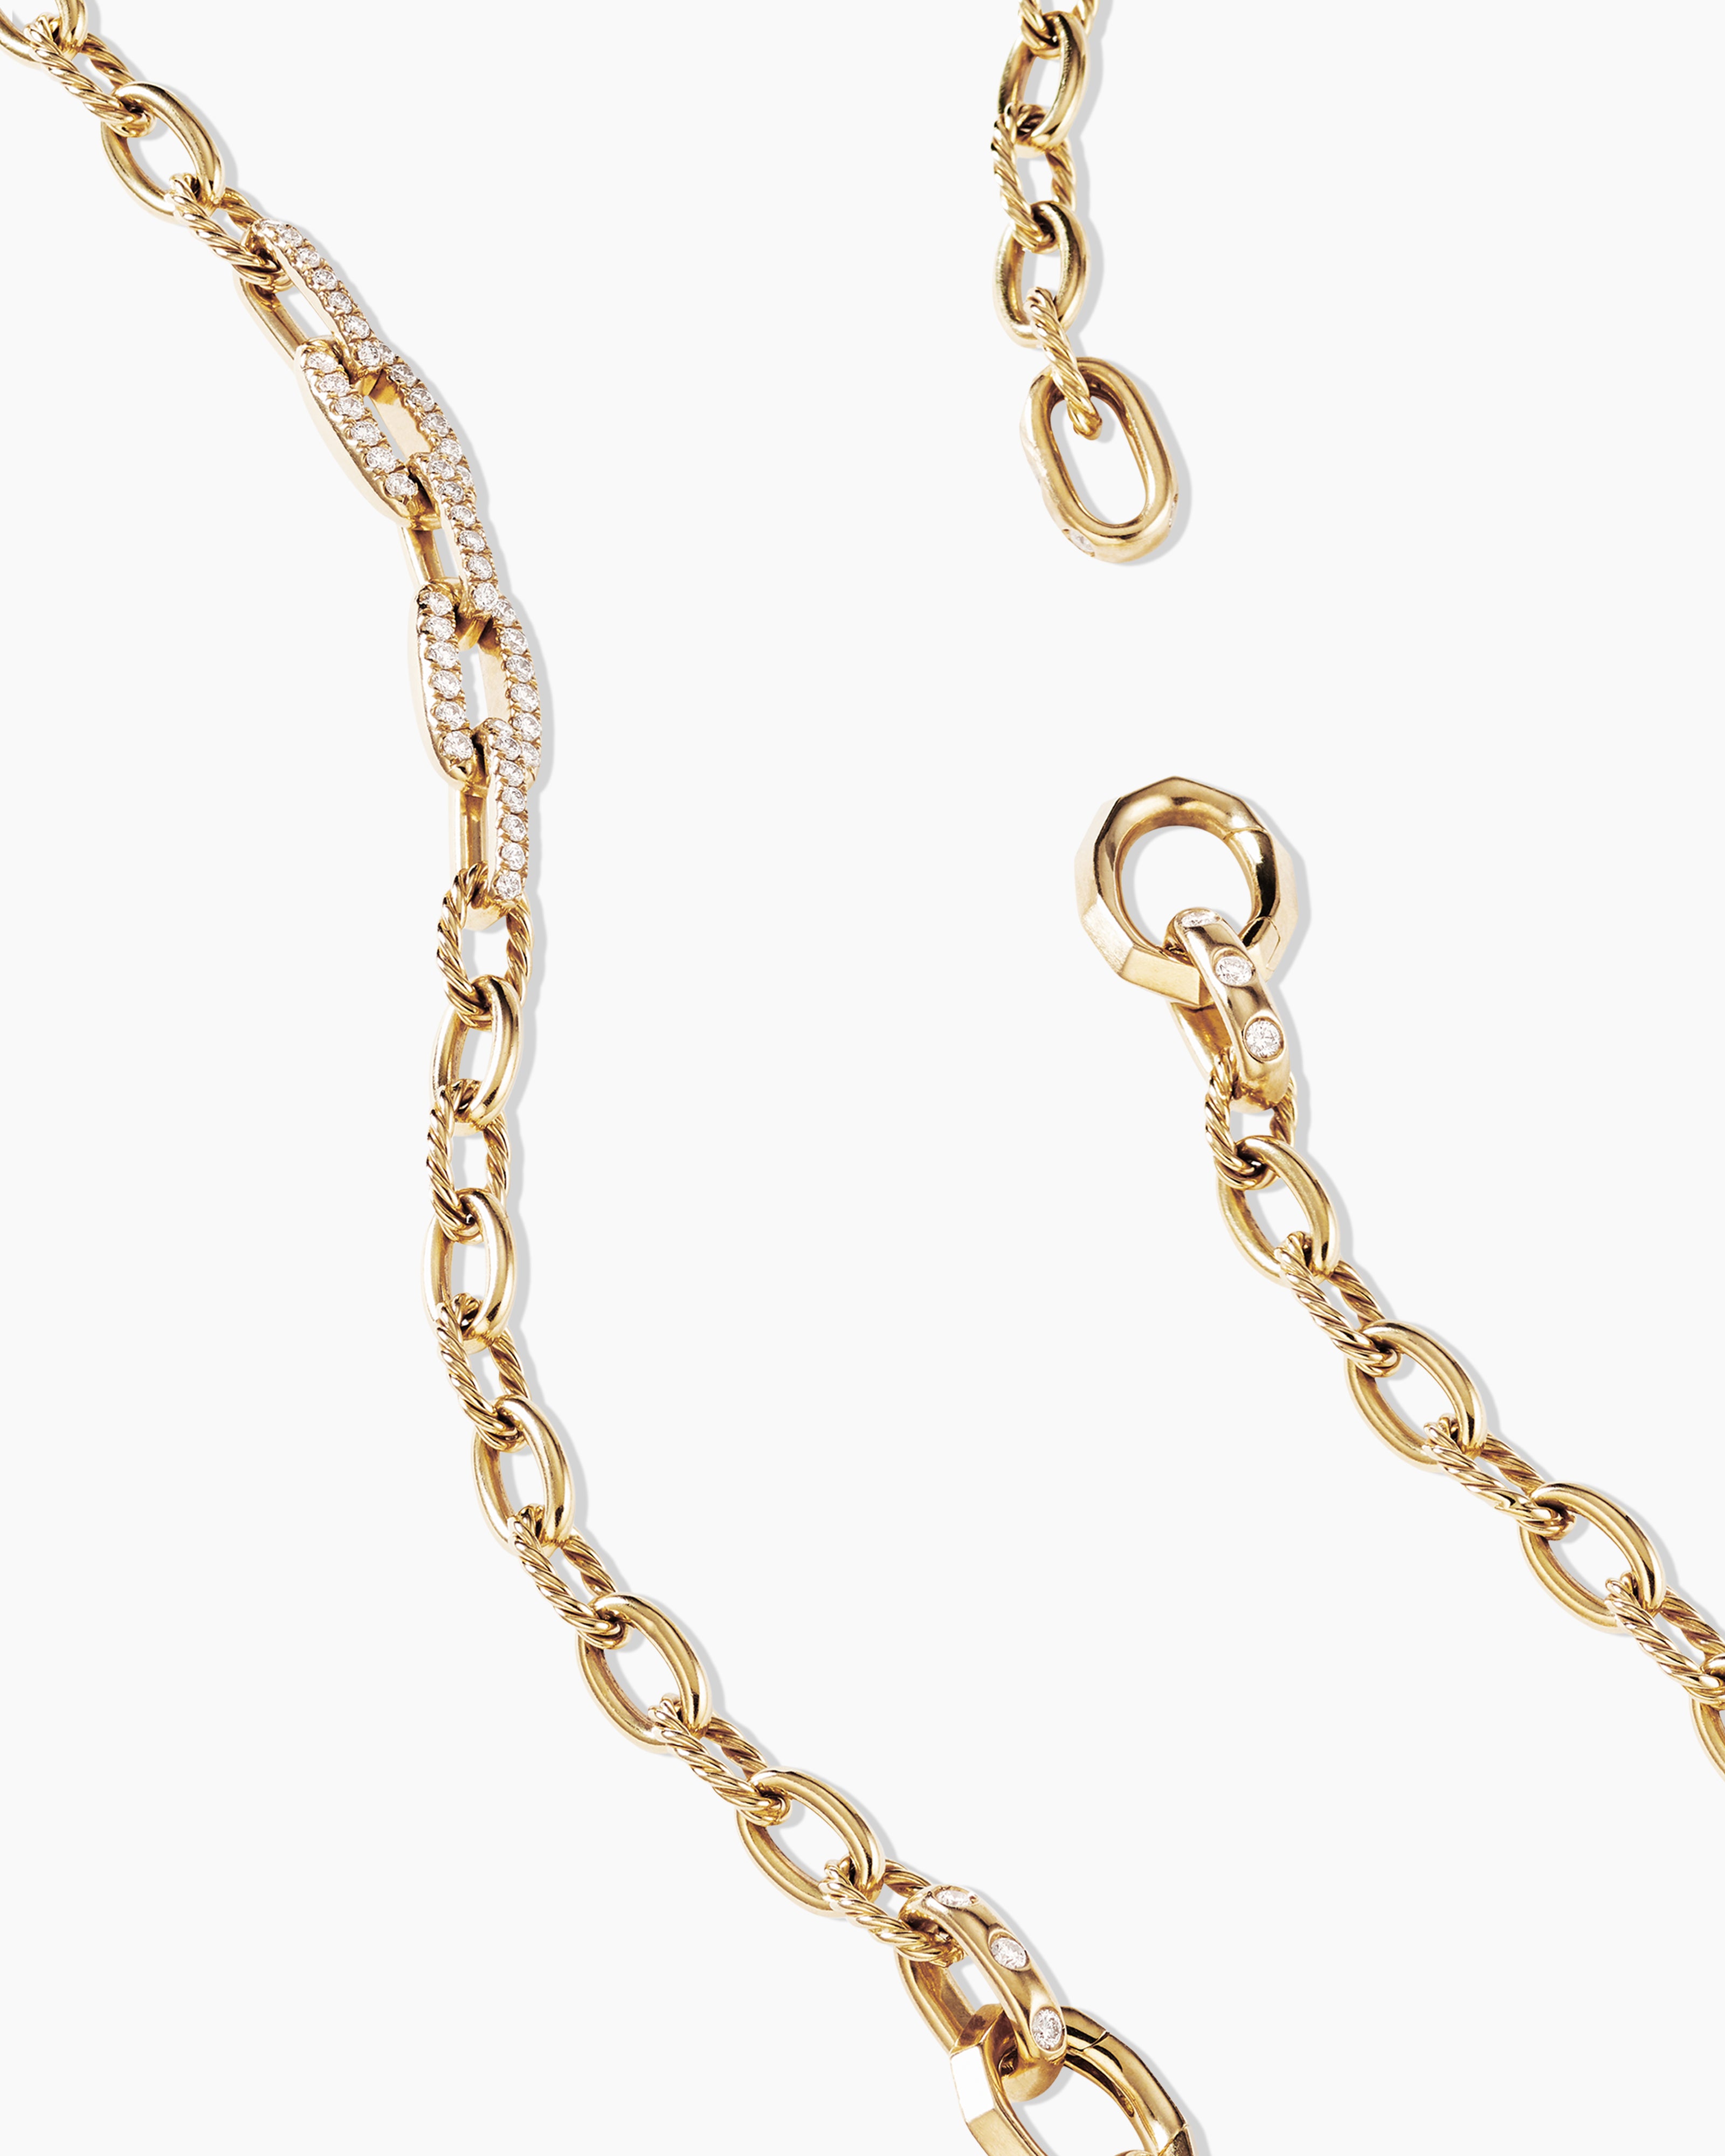 Stax Convertible Chain Necklace in 18K Yellow Gold with Diamonds, 5mm |  David Yurman | Schmuck-Sets